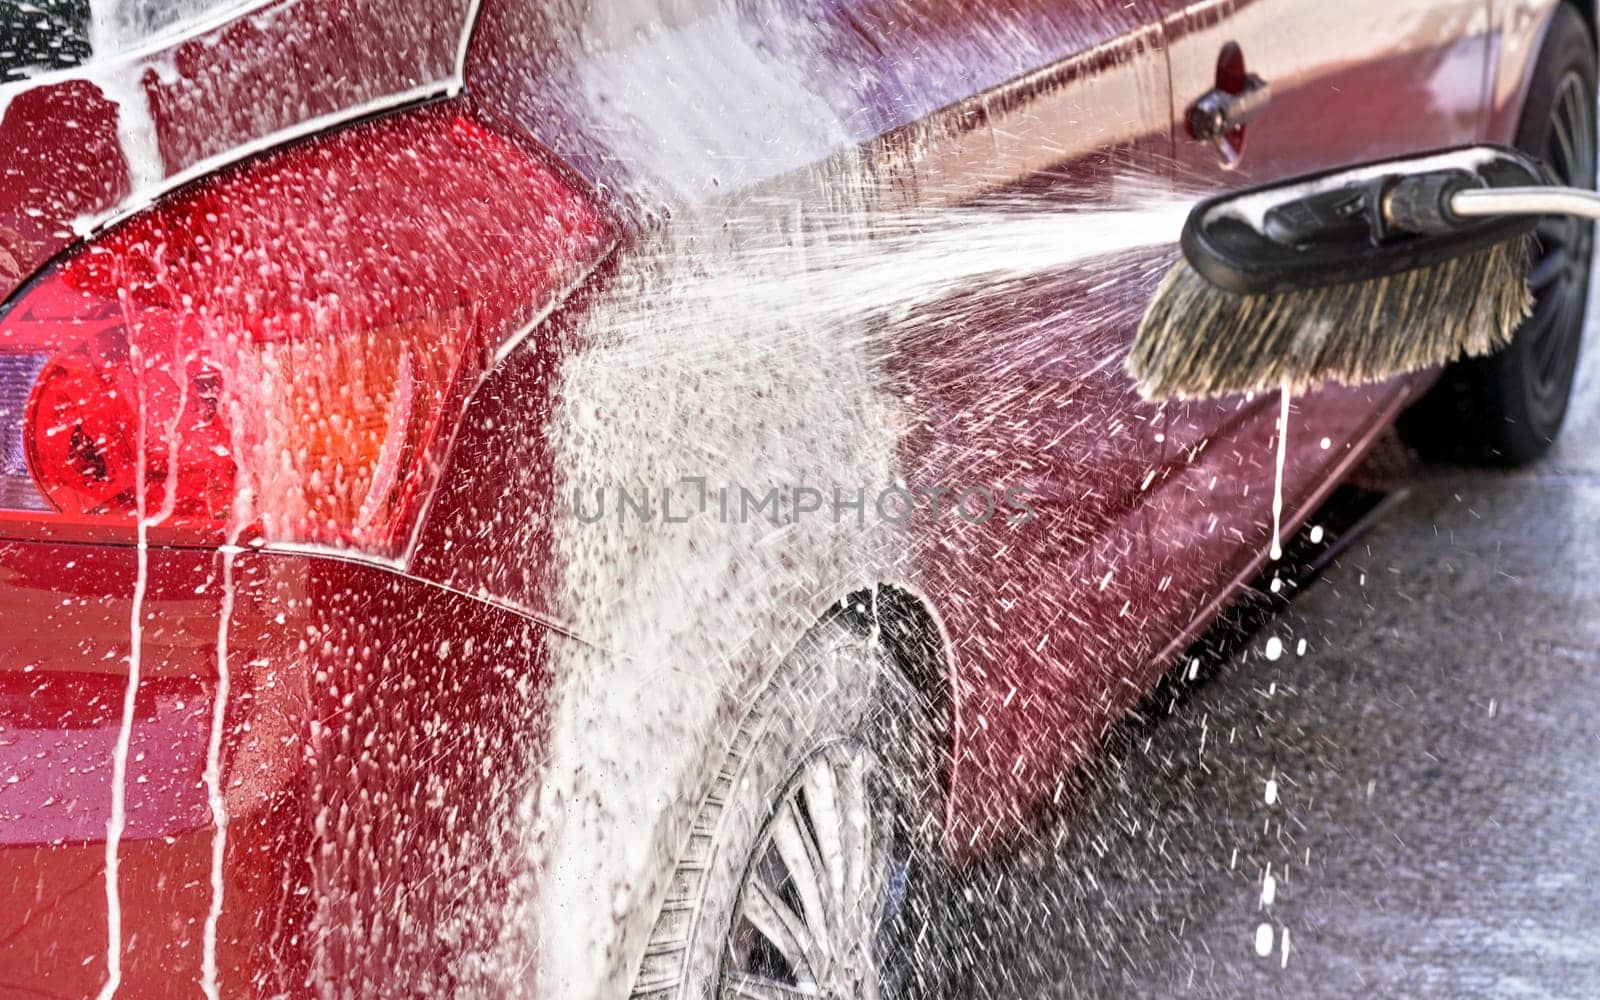 Red car washed in self serve carwash, detail on white soap foam spraying from brush / broom onto side above rear wheel